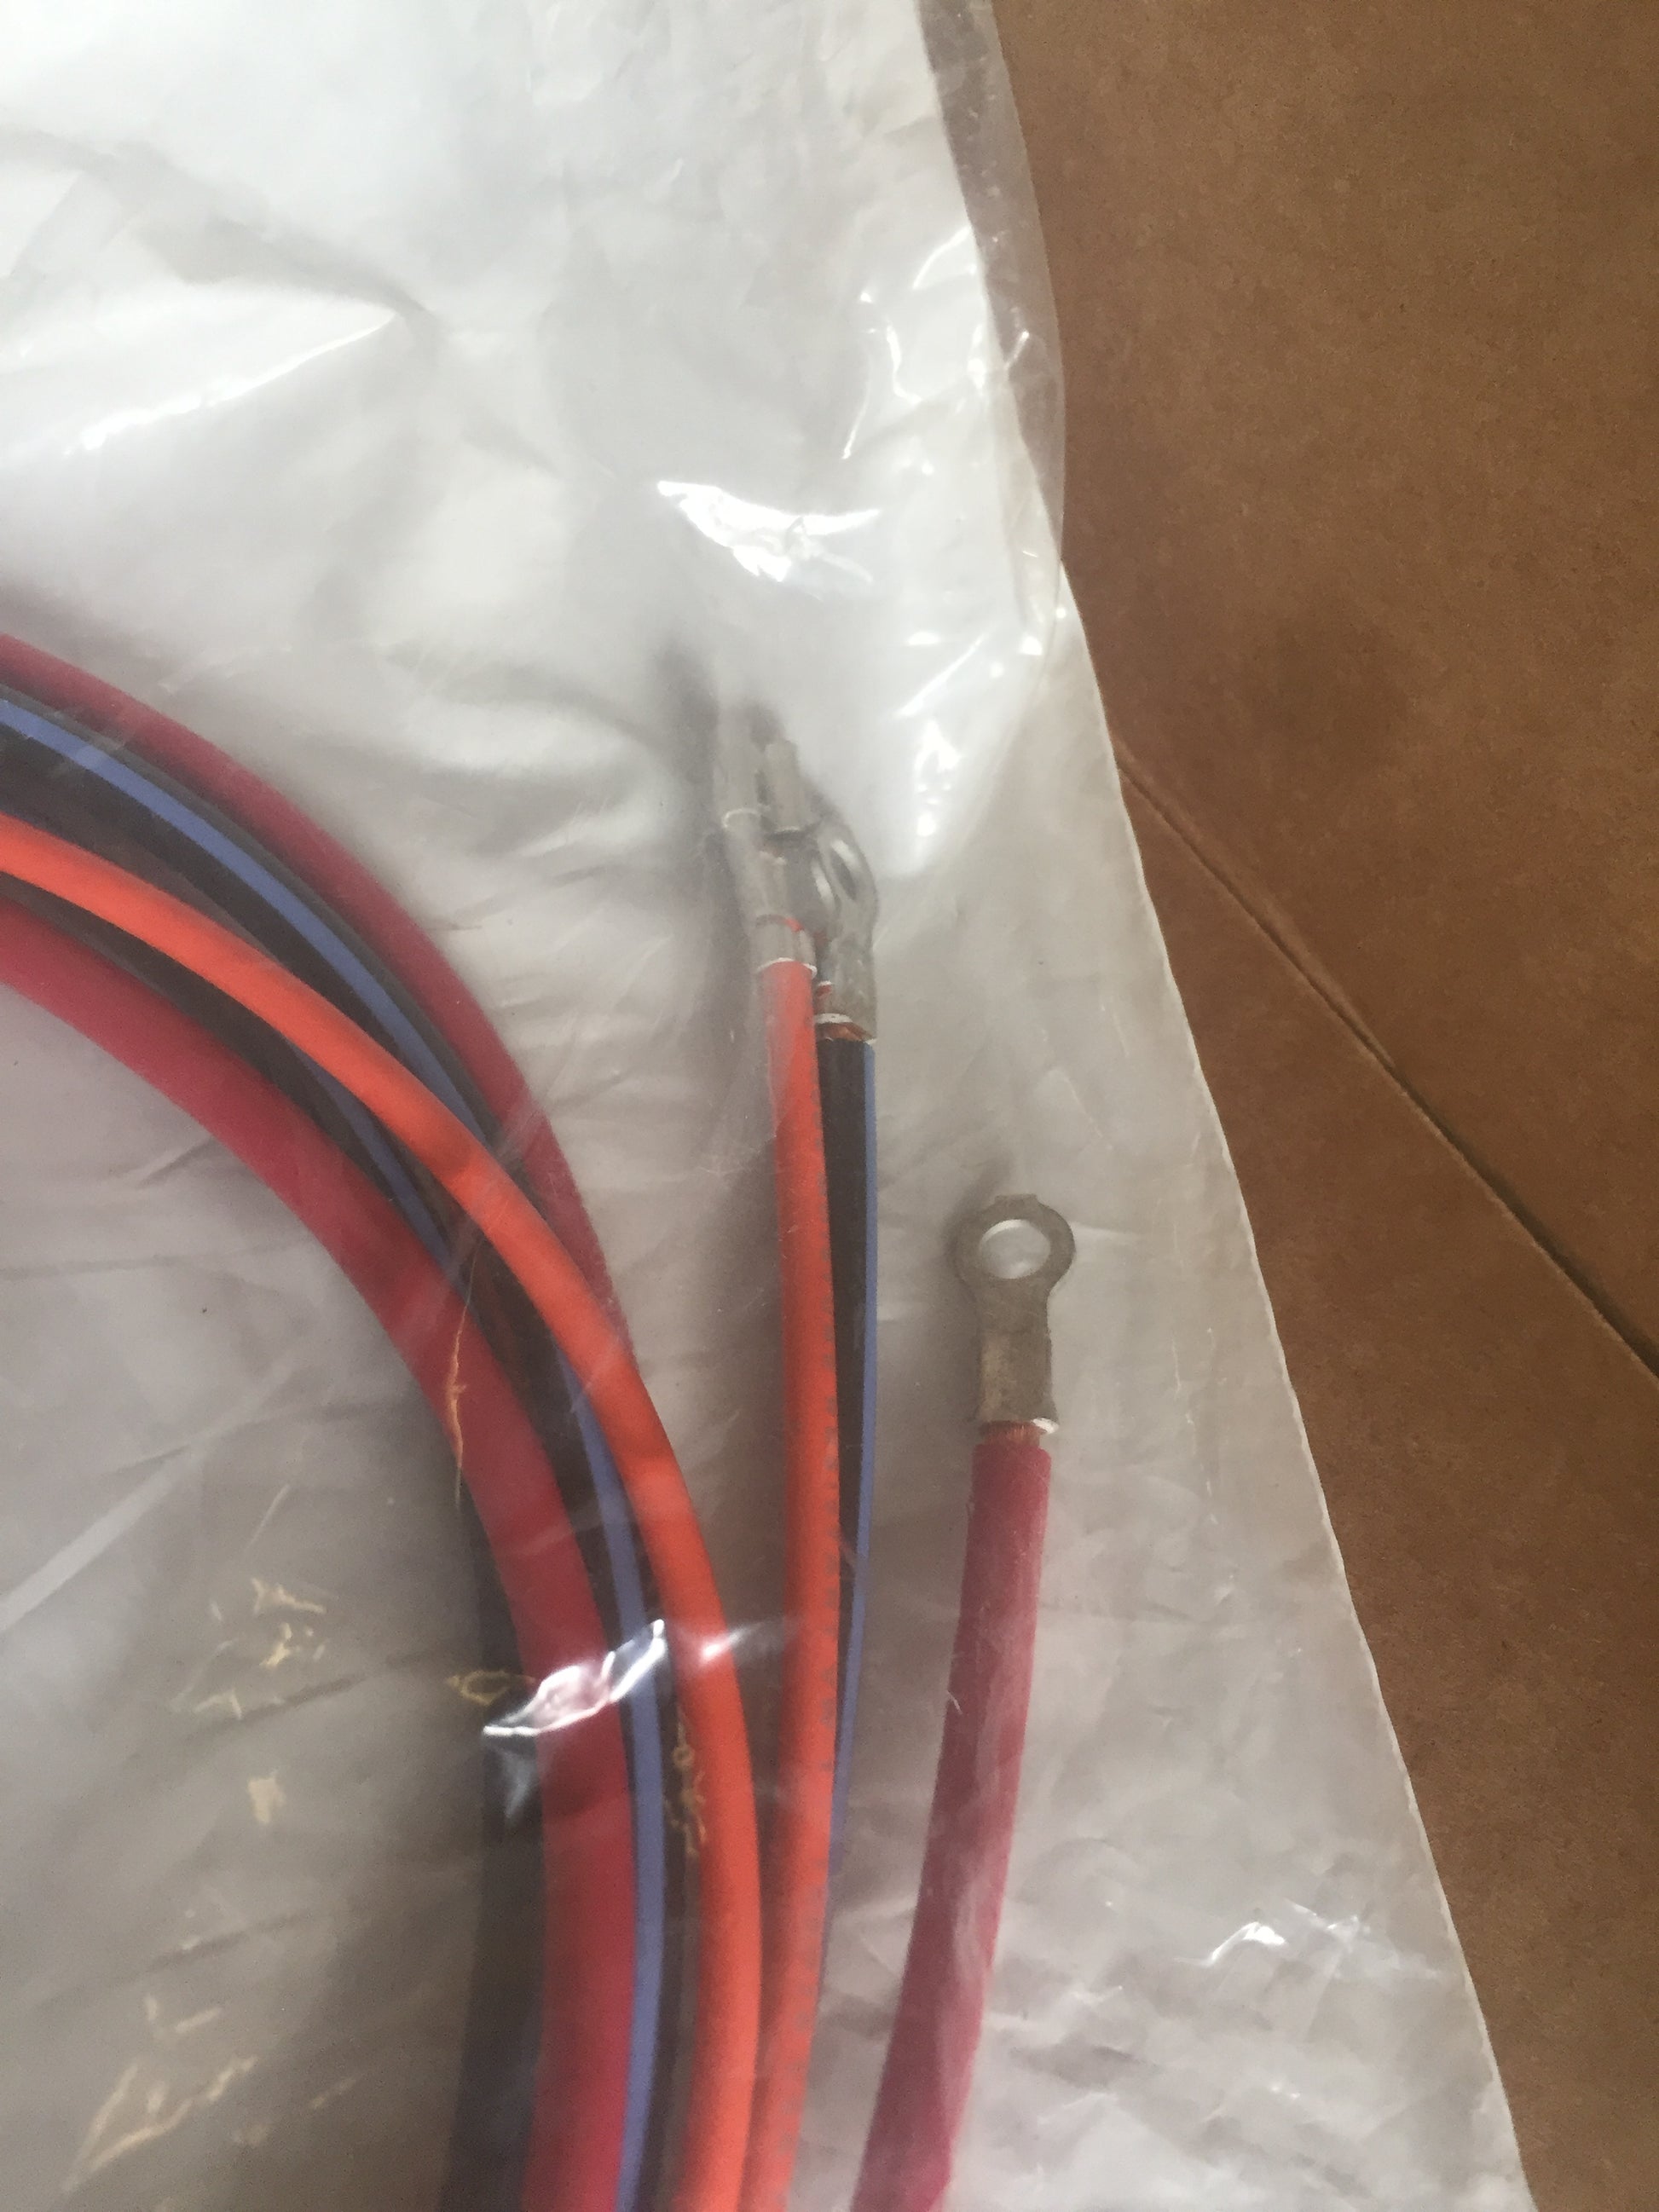 SCROLL COMPRESSOR HARNESS PLUG, BK/BL, OR, RD WIRES, 54 IN LENGTH